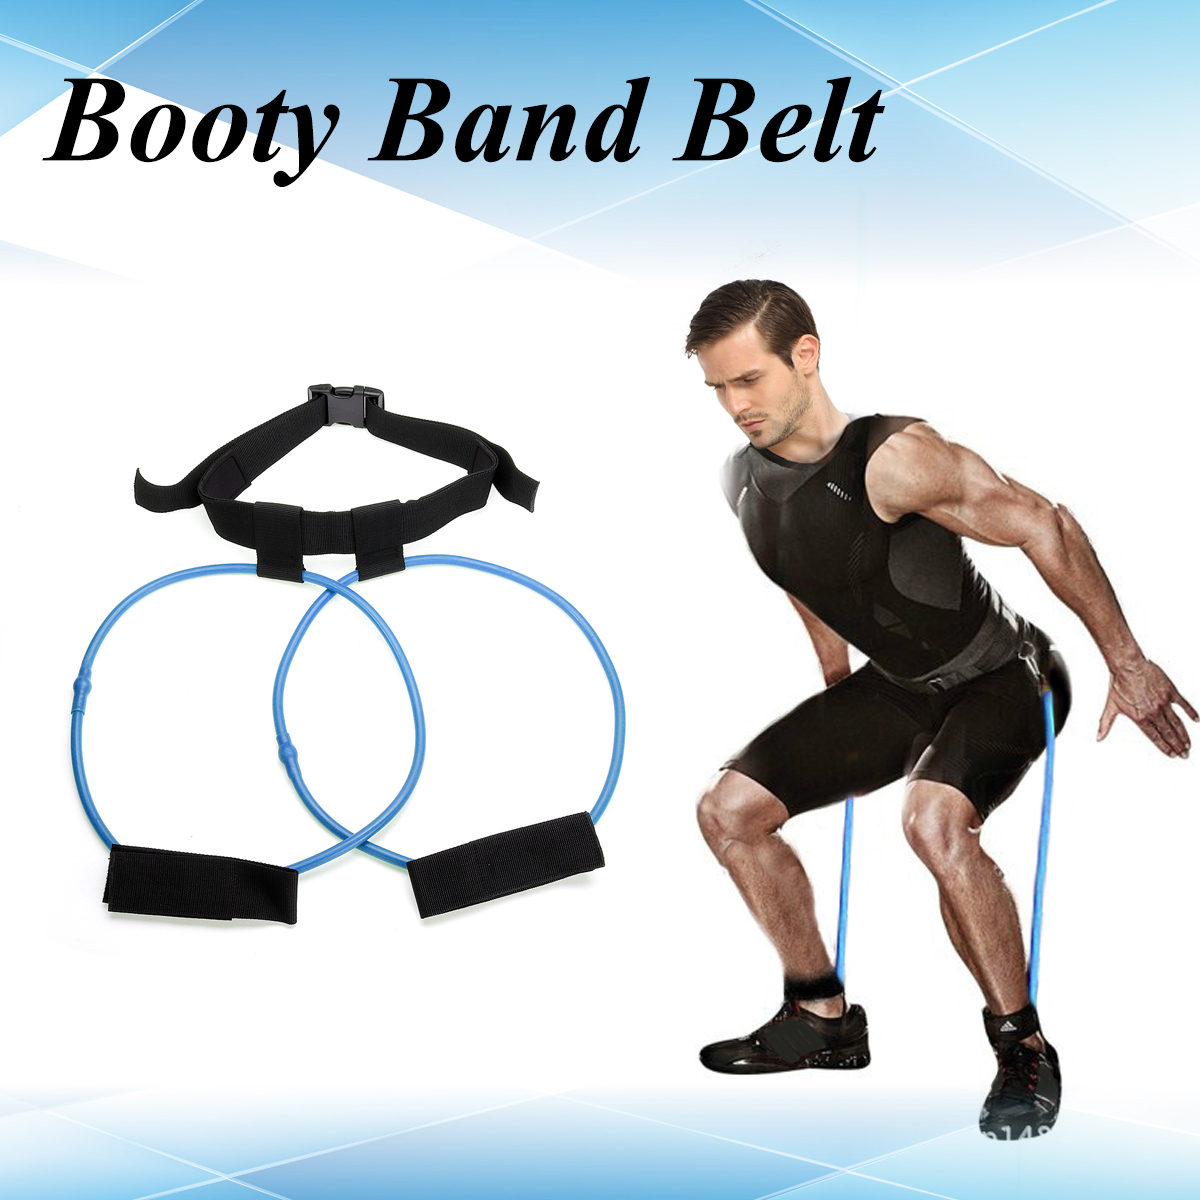 30LB-Booty-Resistance-Bands-Belt-Gym-Exercise-Training-Yoga-Butt-Lift-Fitness-Health-Workout-Band-1372253-10